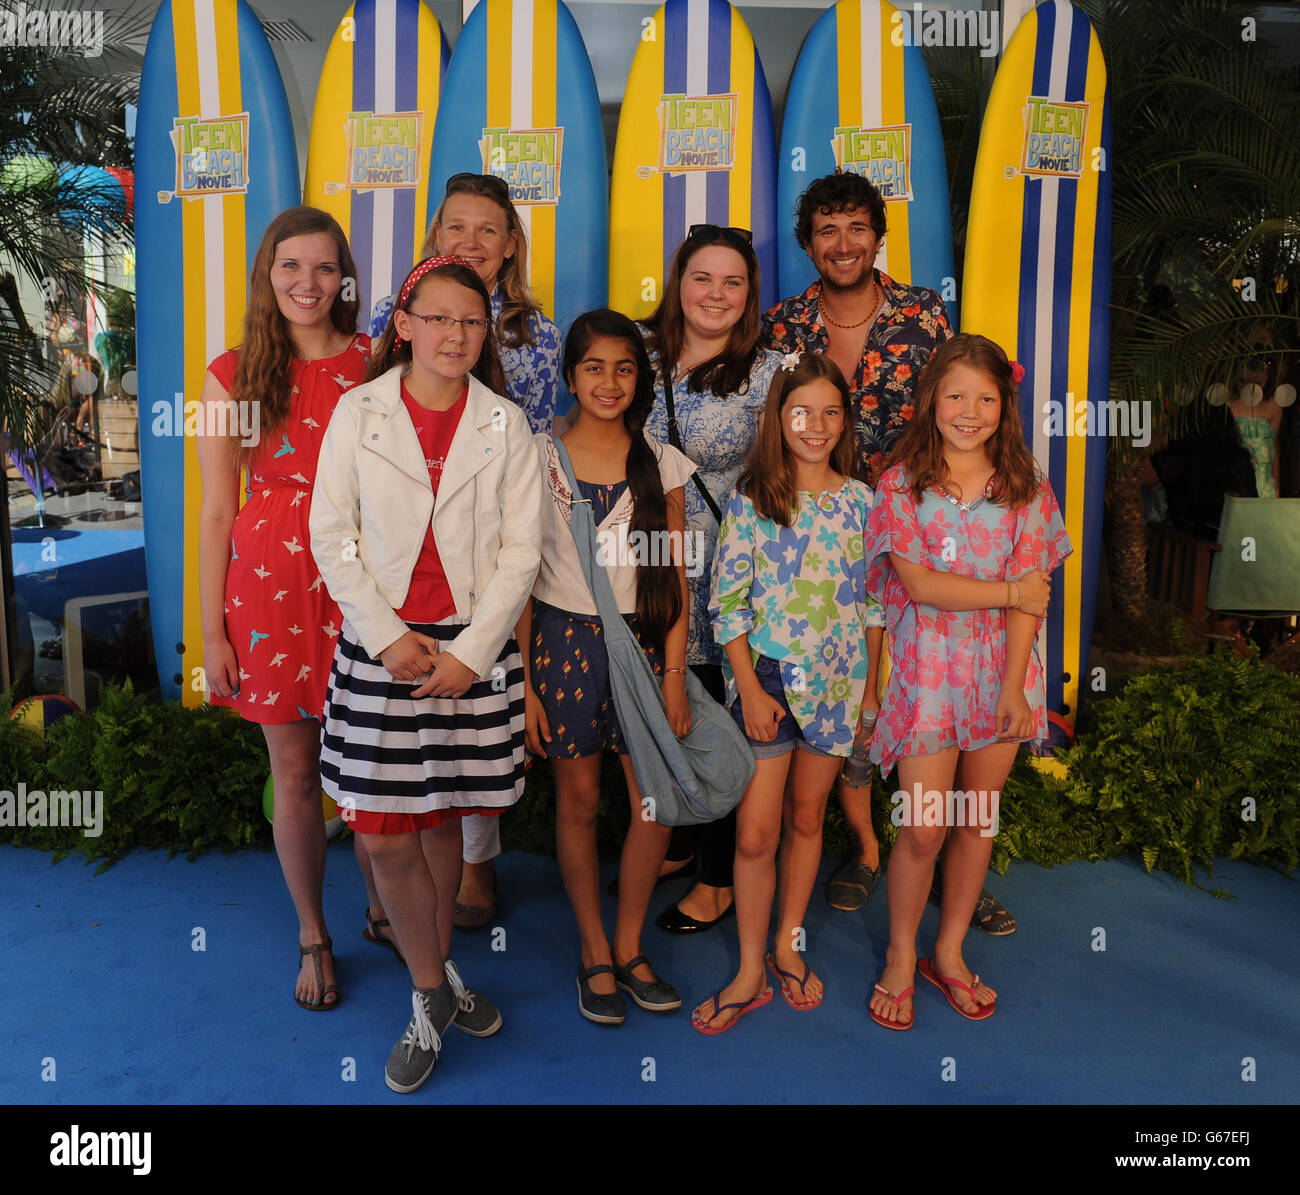 Guests attend the UK screening at Southbank, London, of the Disney Channel Original Movie, Teen Beach Movie, which premieres on the Disney Channel UK on 19th July at 6pm. Stock Photo